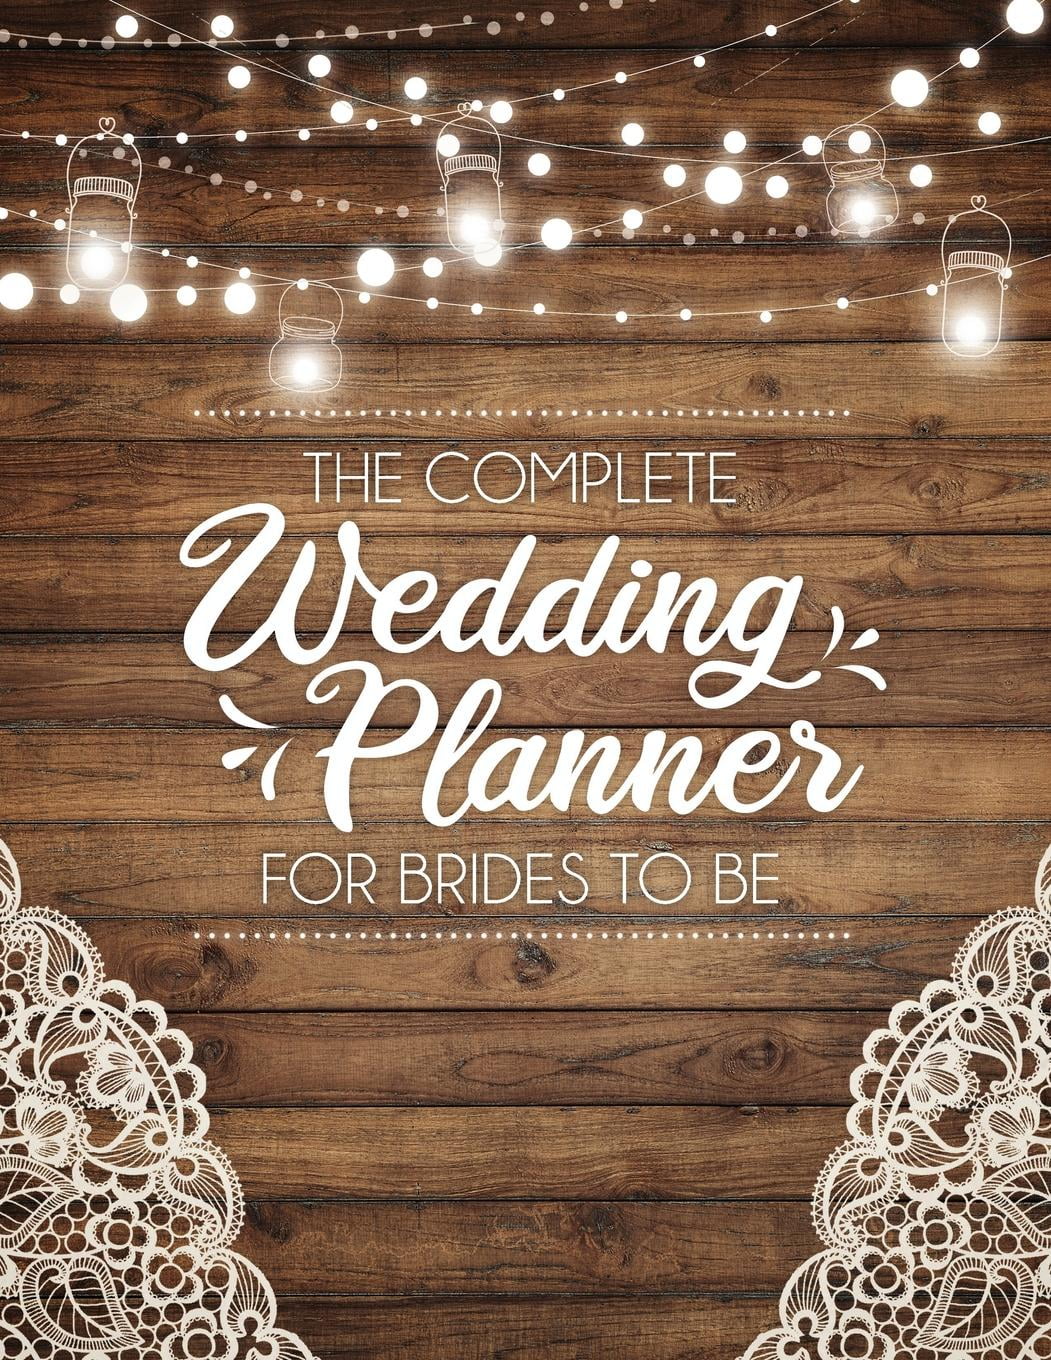 The Complete Wedding Planner For Brides To Be A Rustic